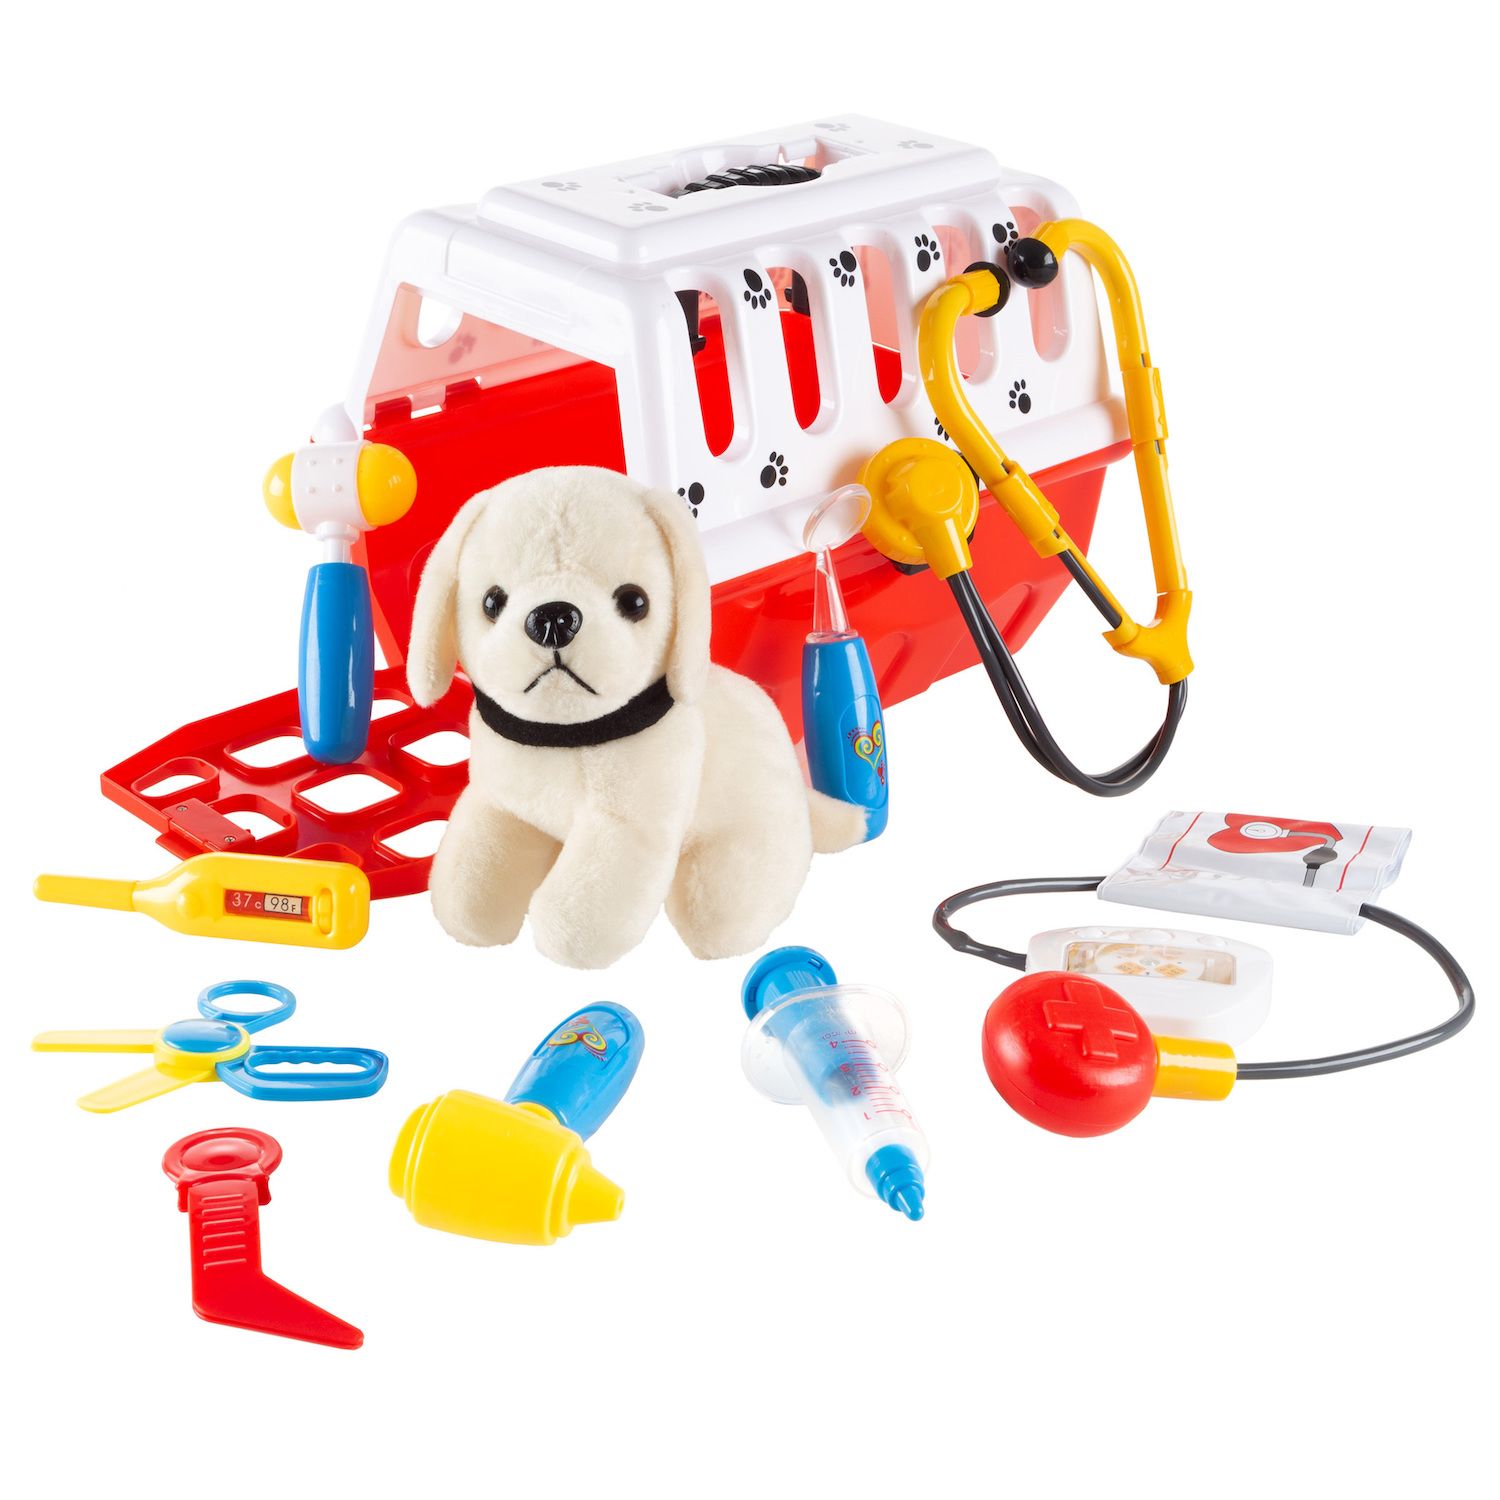 Image for Hey! Play! 11-Piece Kids Veterinary Toy Set at Kohl's.